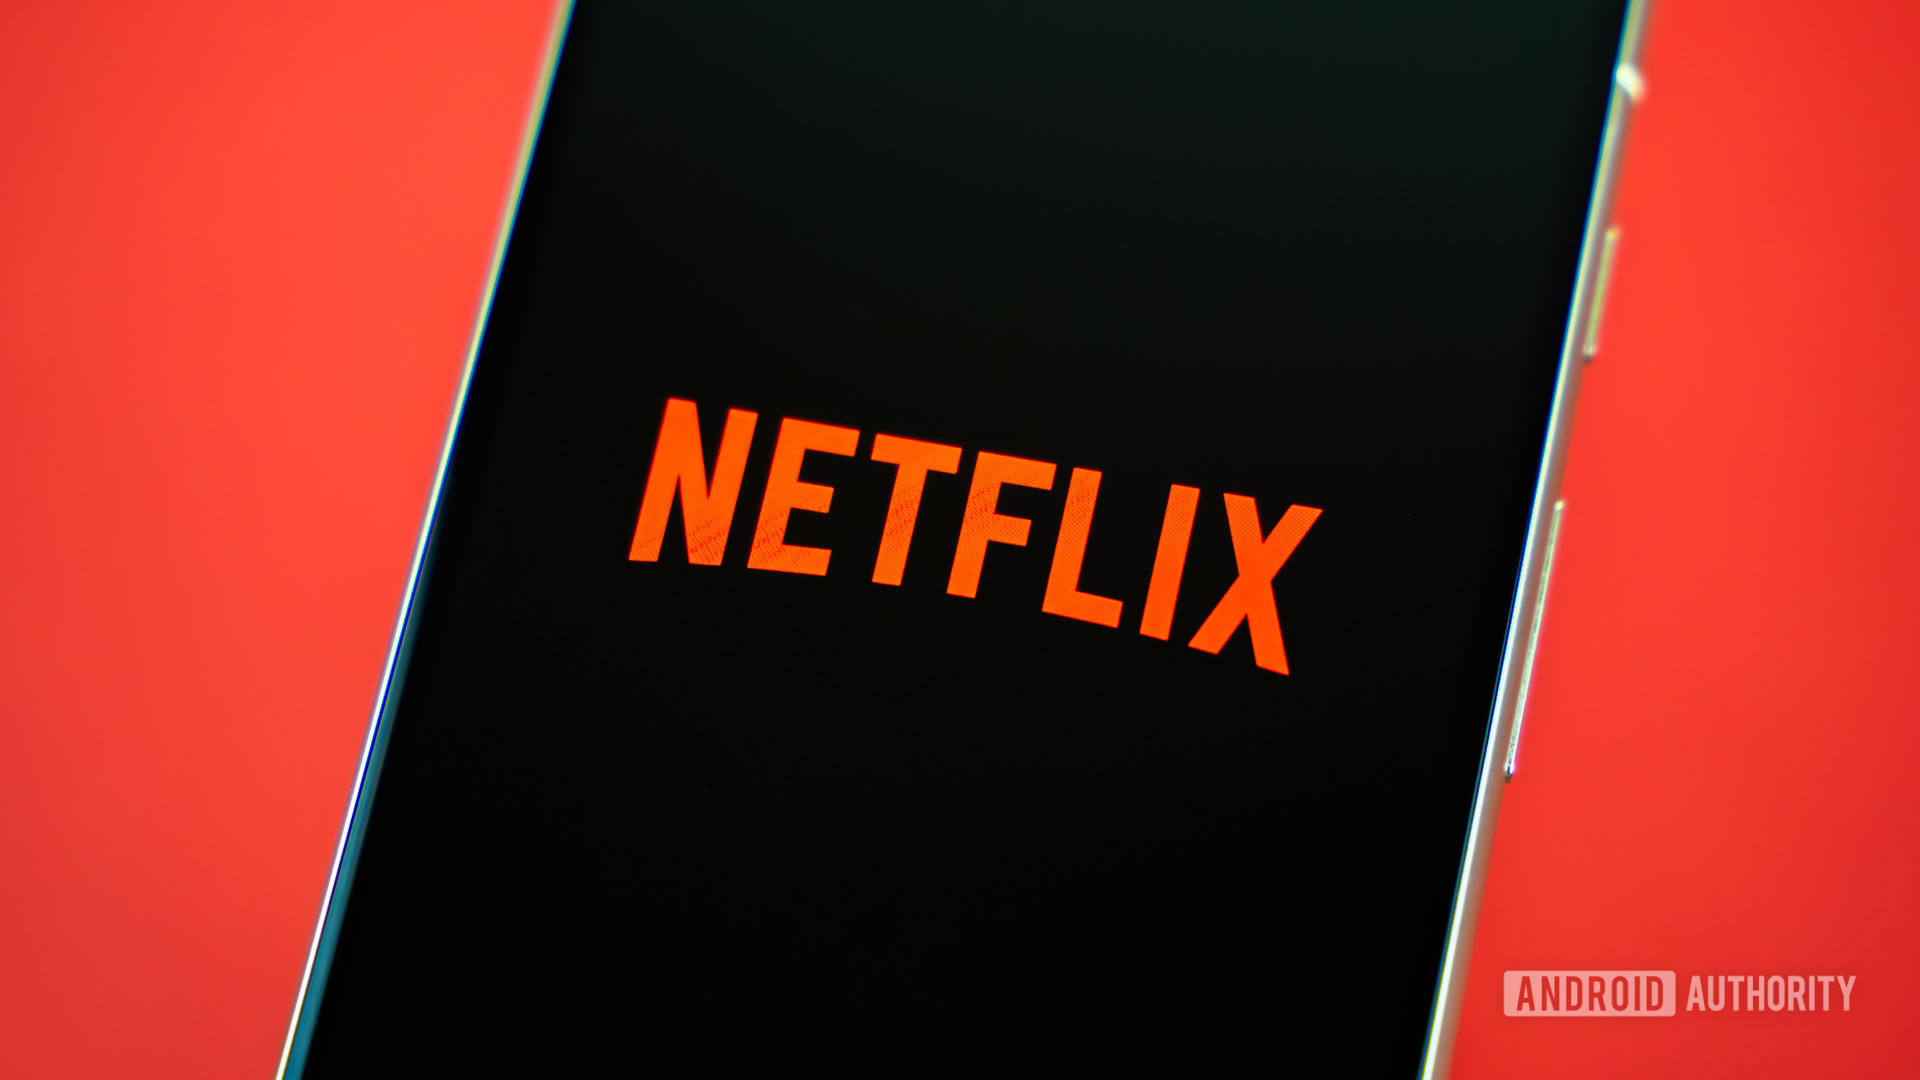 Netflix’s upcoming HDR toggle might save your movie experience (APK teardown)